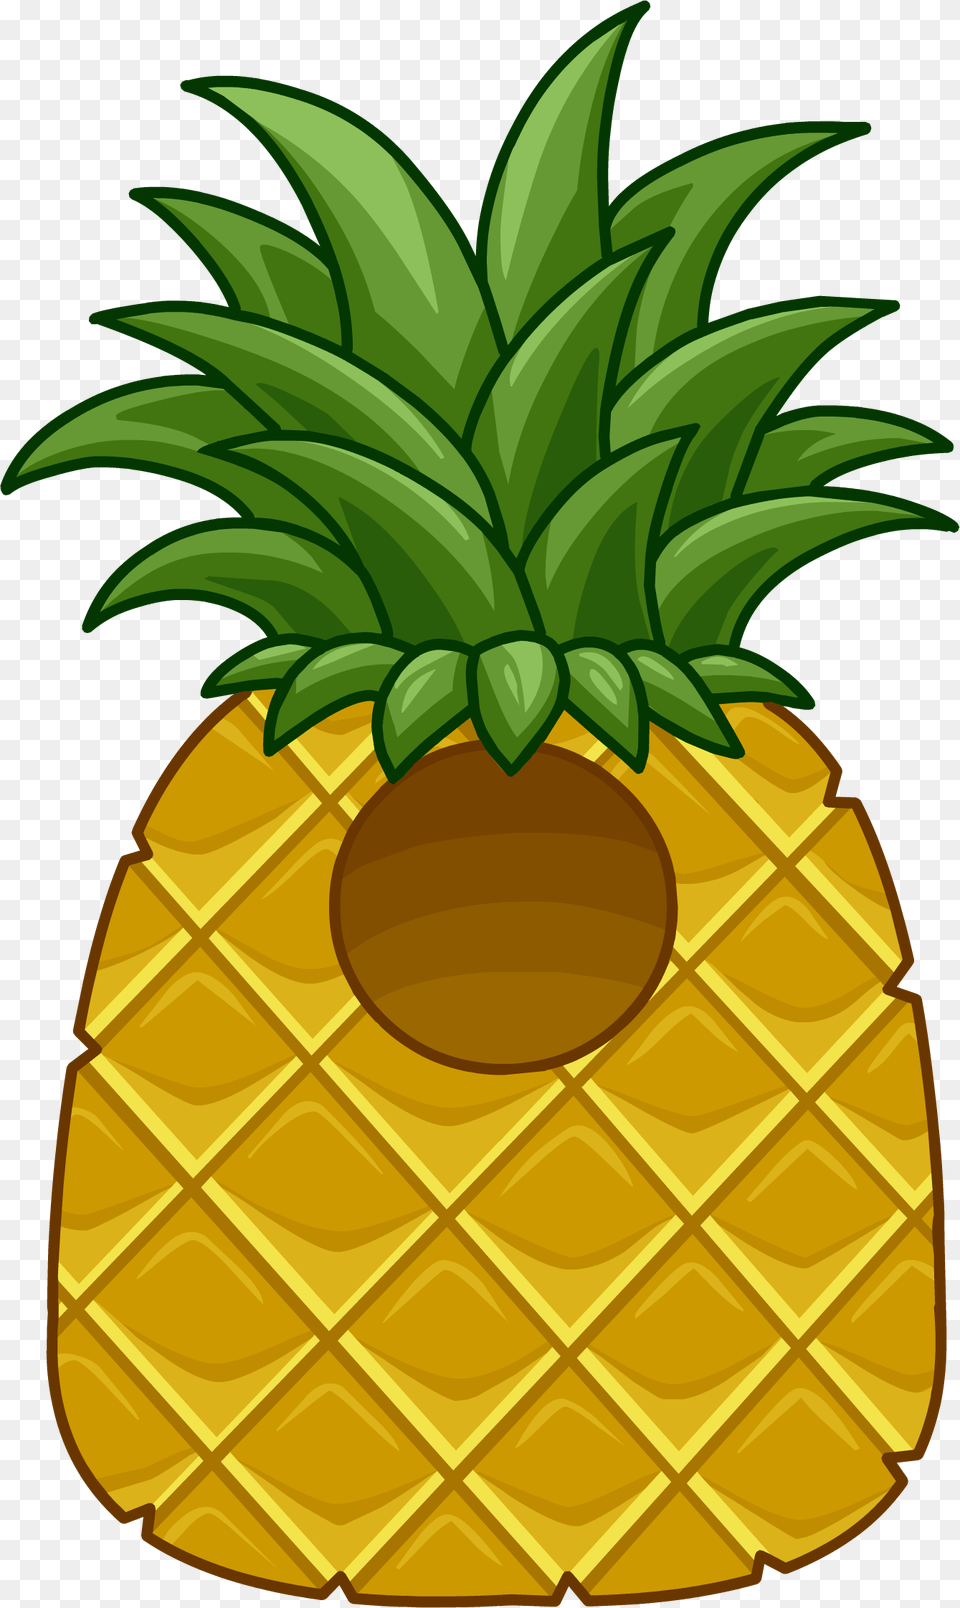 Club Penguin Rewritten Wiki Fruit Costumes Club Penguin, Food, Pineapple, Plant, Produce Png Image